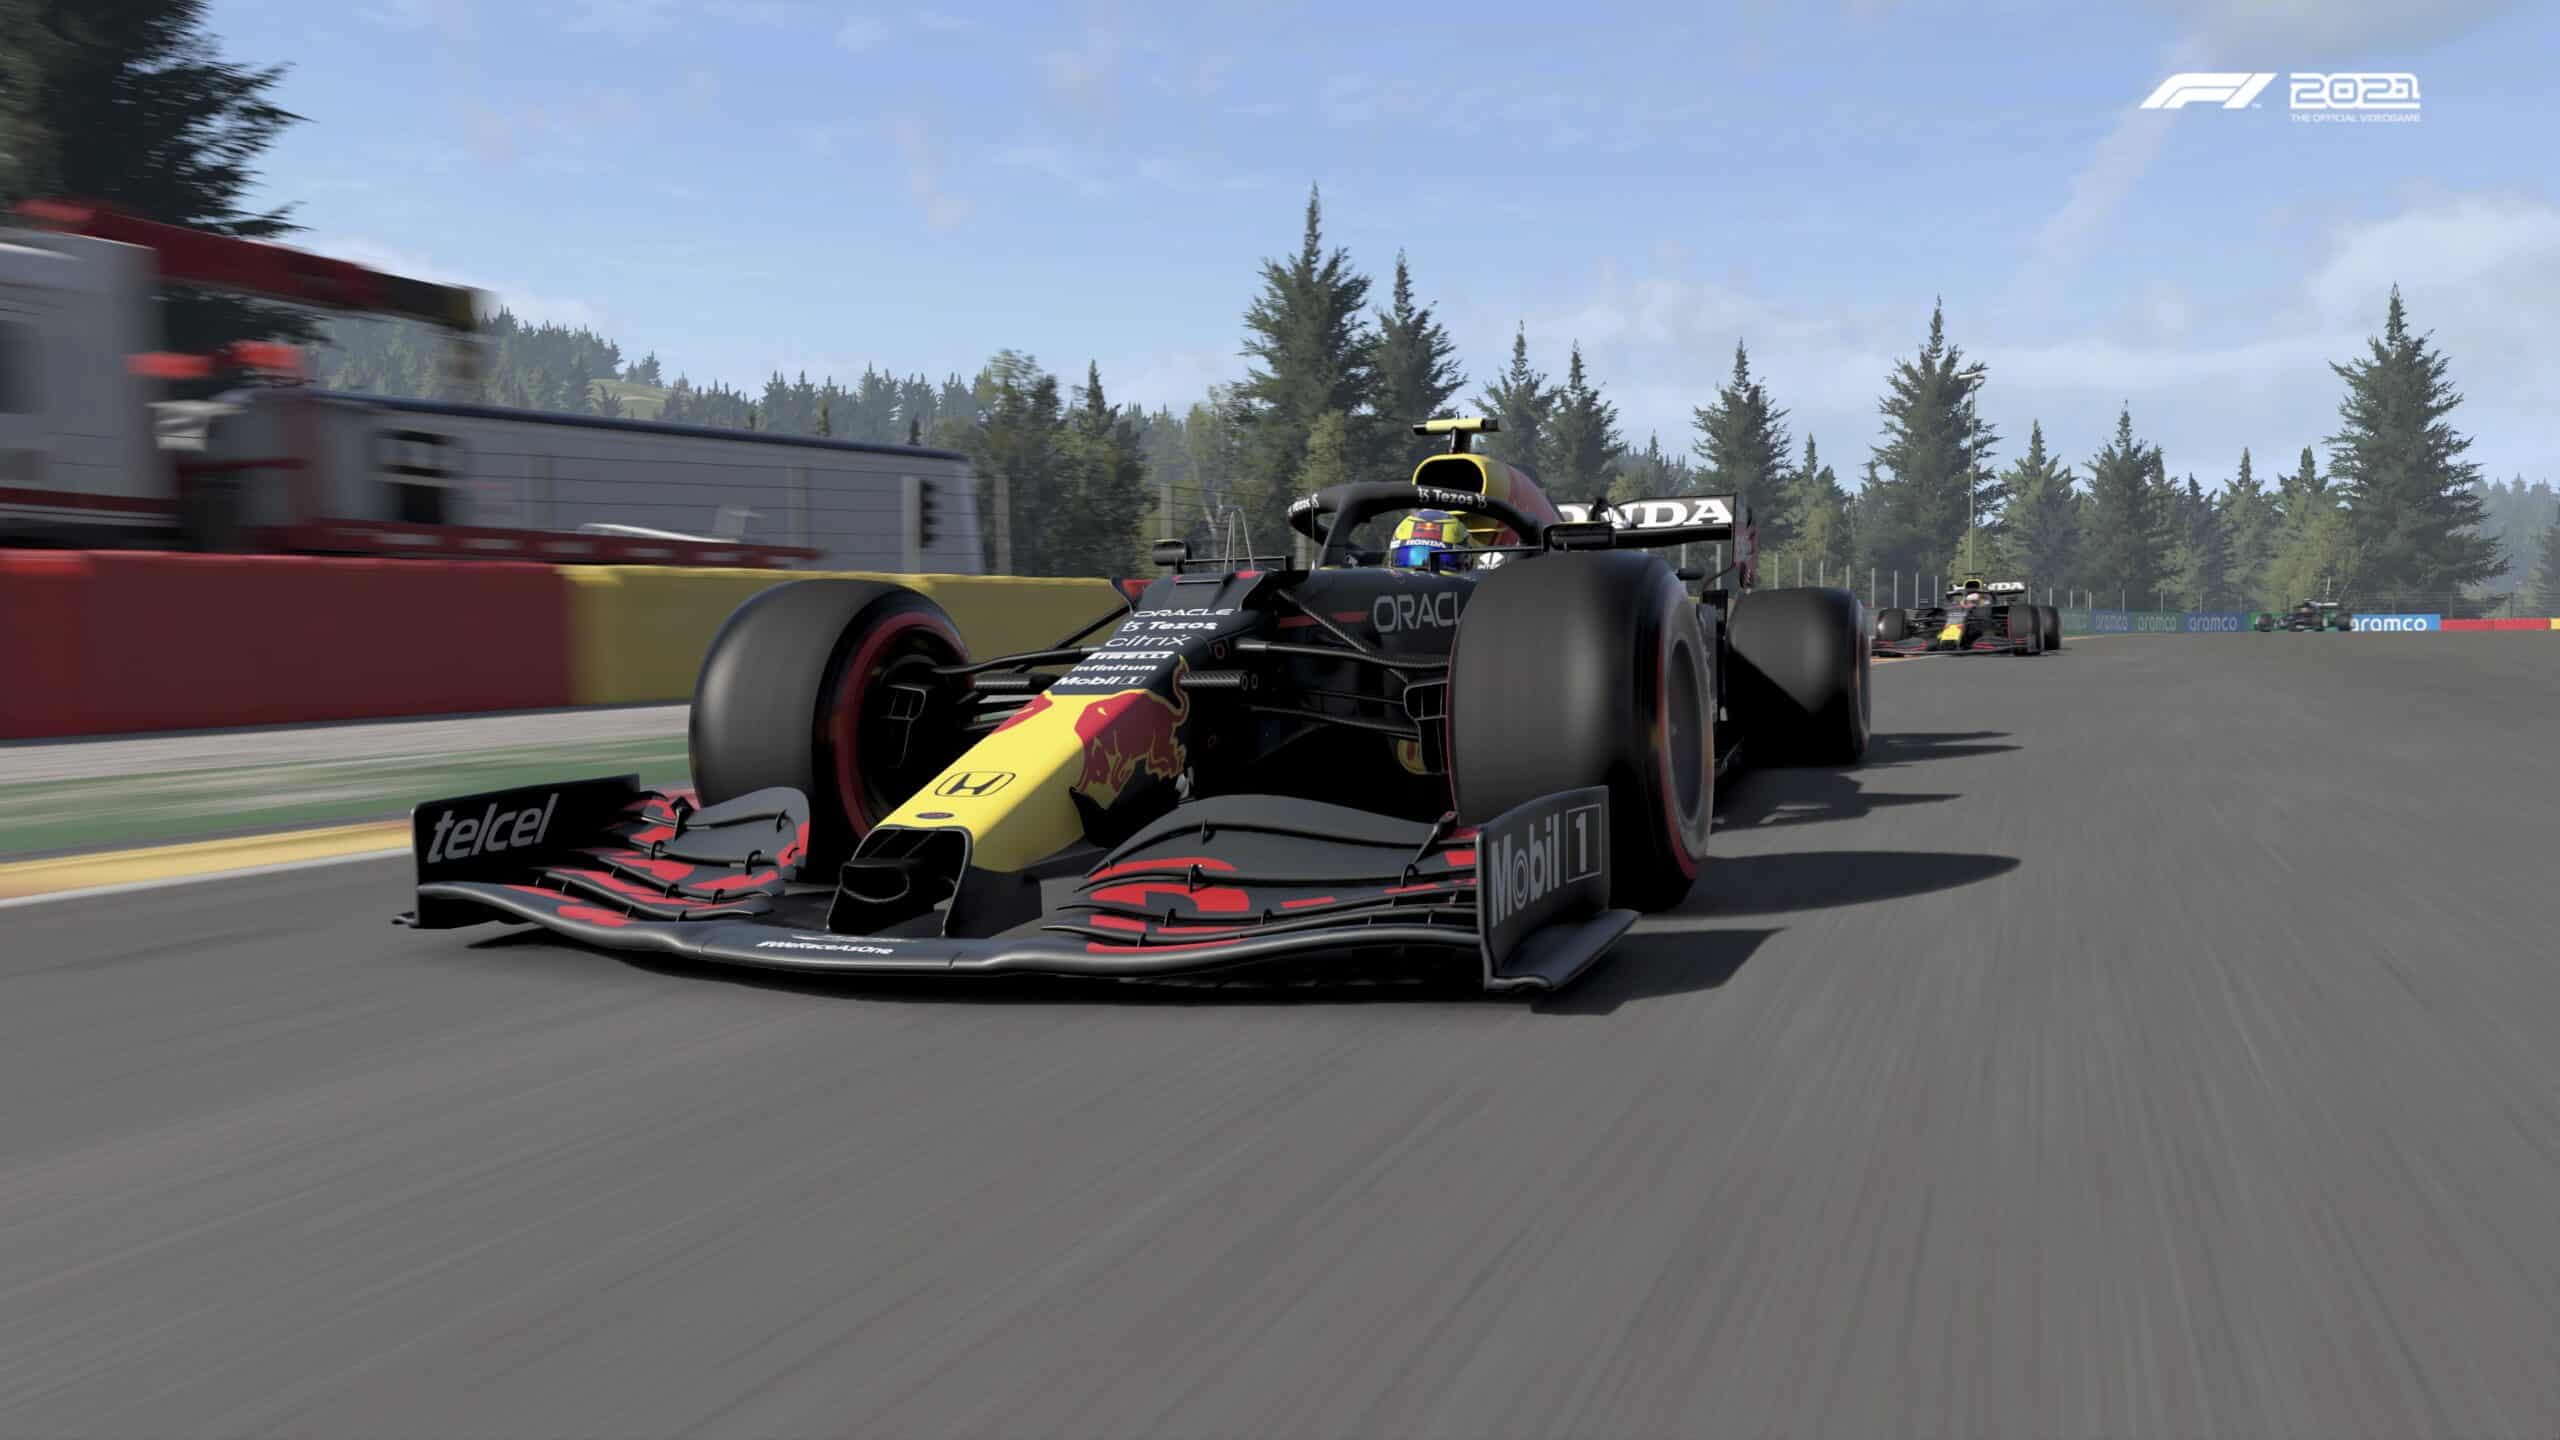 F1 2021 game patch 1.06 addresses connectivity, crashes and temporarily disables 3D audio